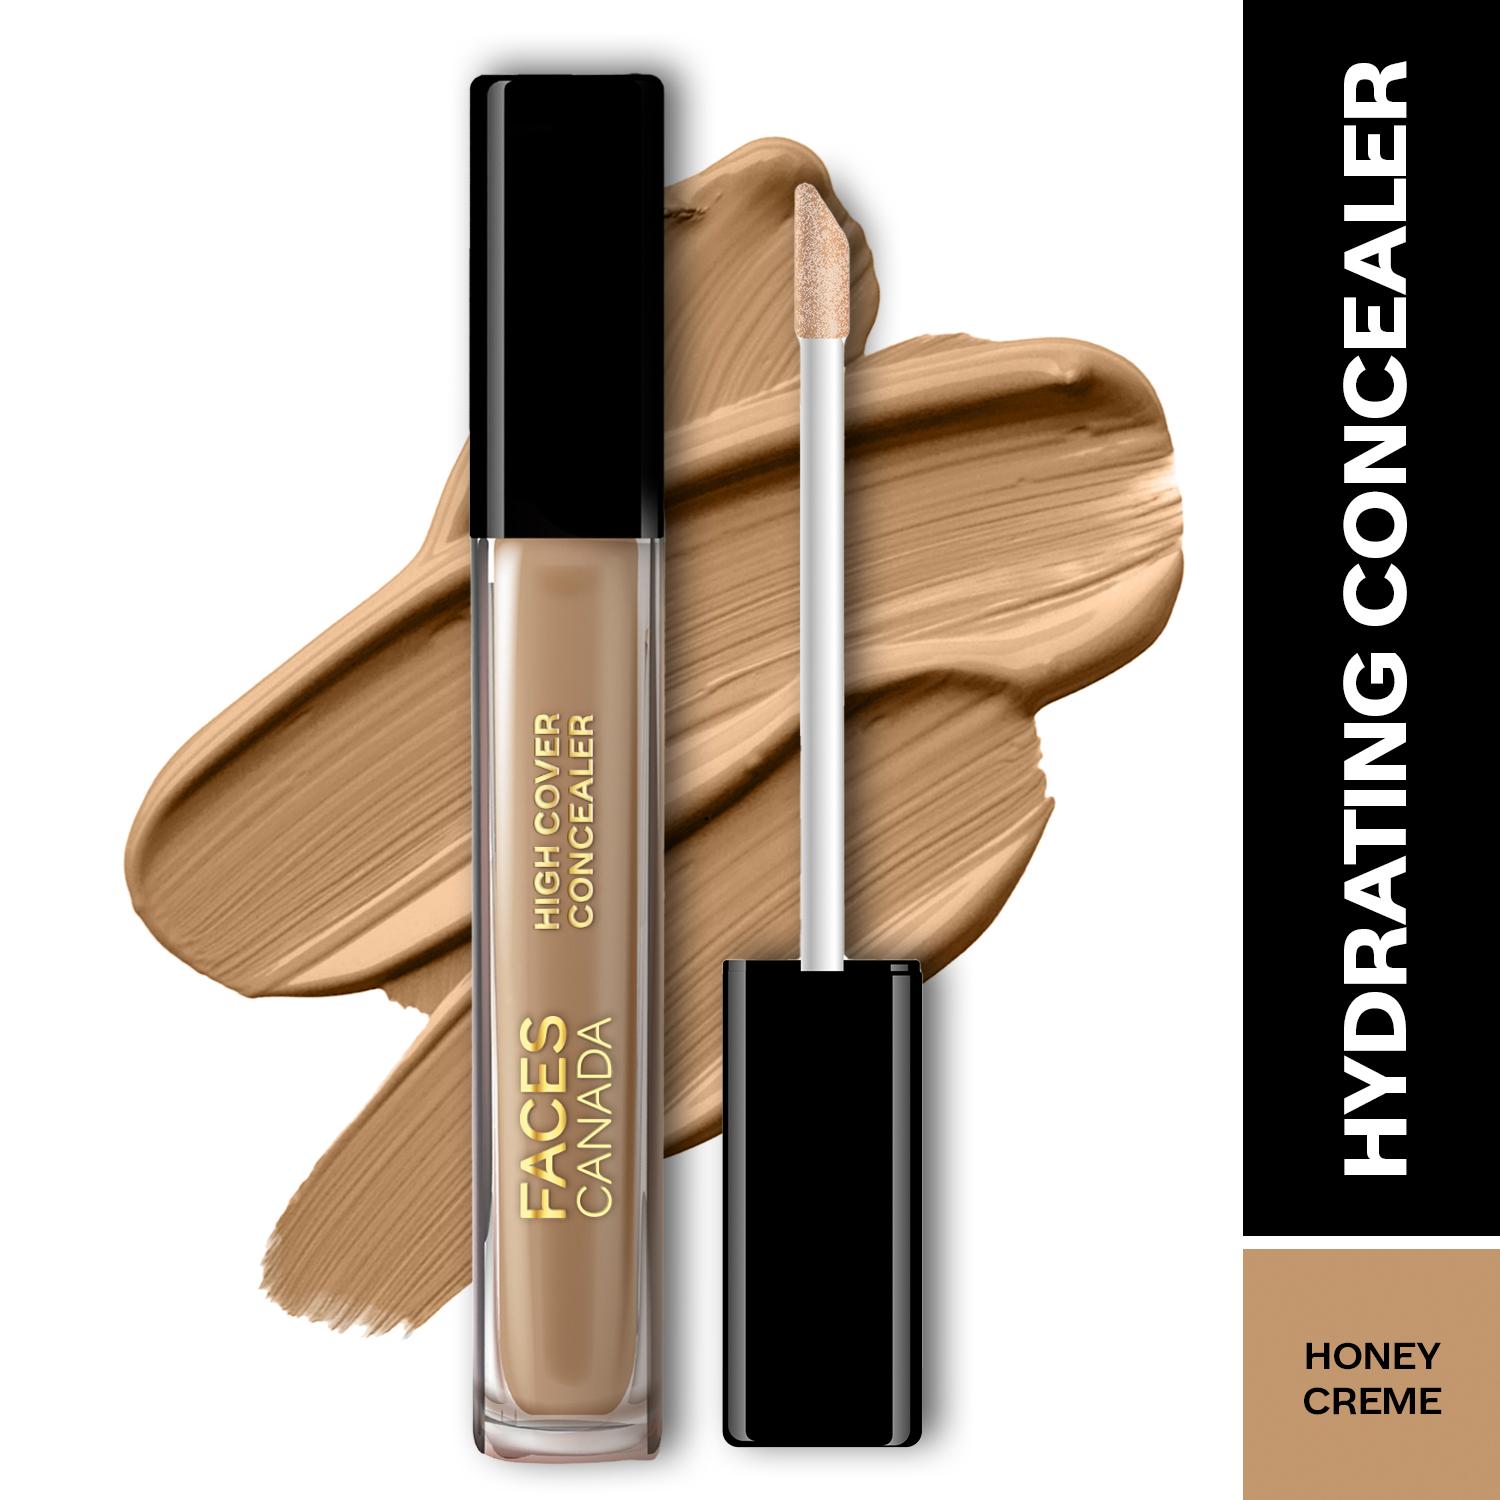 Faces Canada | Faces Canada High Cover Concealer - Honey Creme 02, Blends Easily, Natural Finish (4 ml)